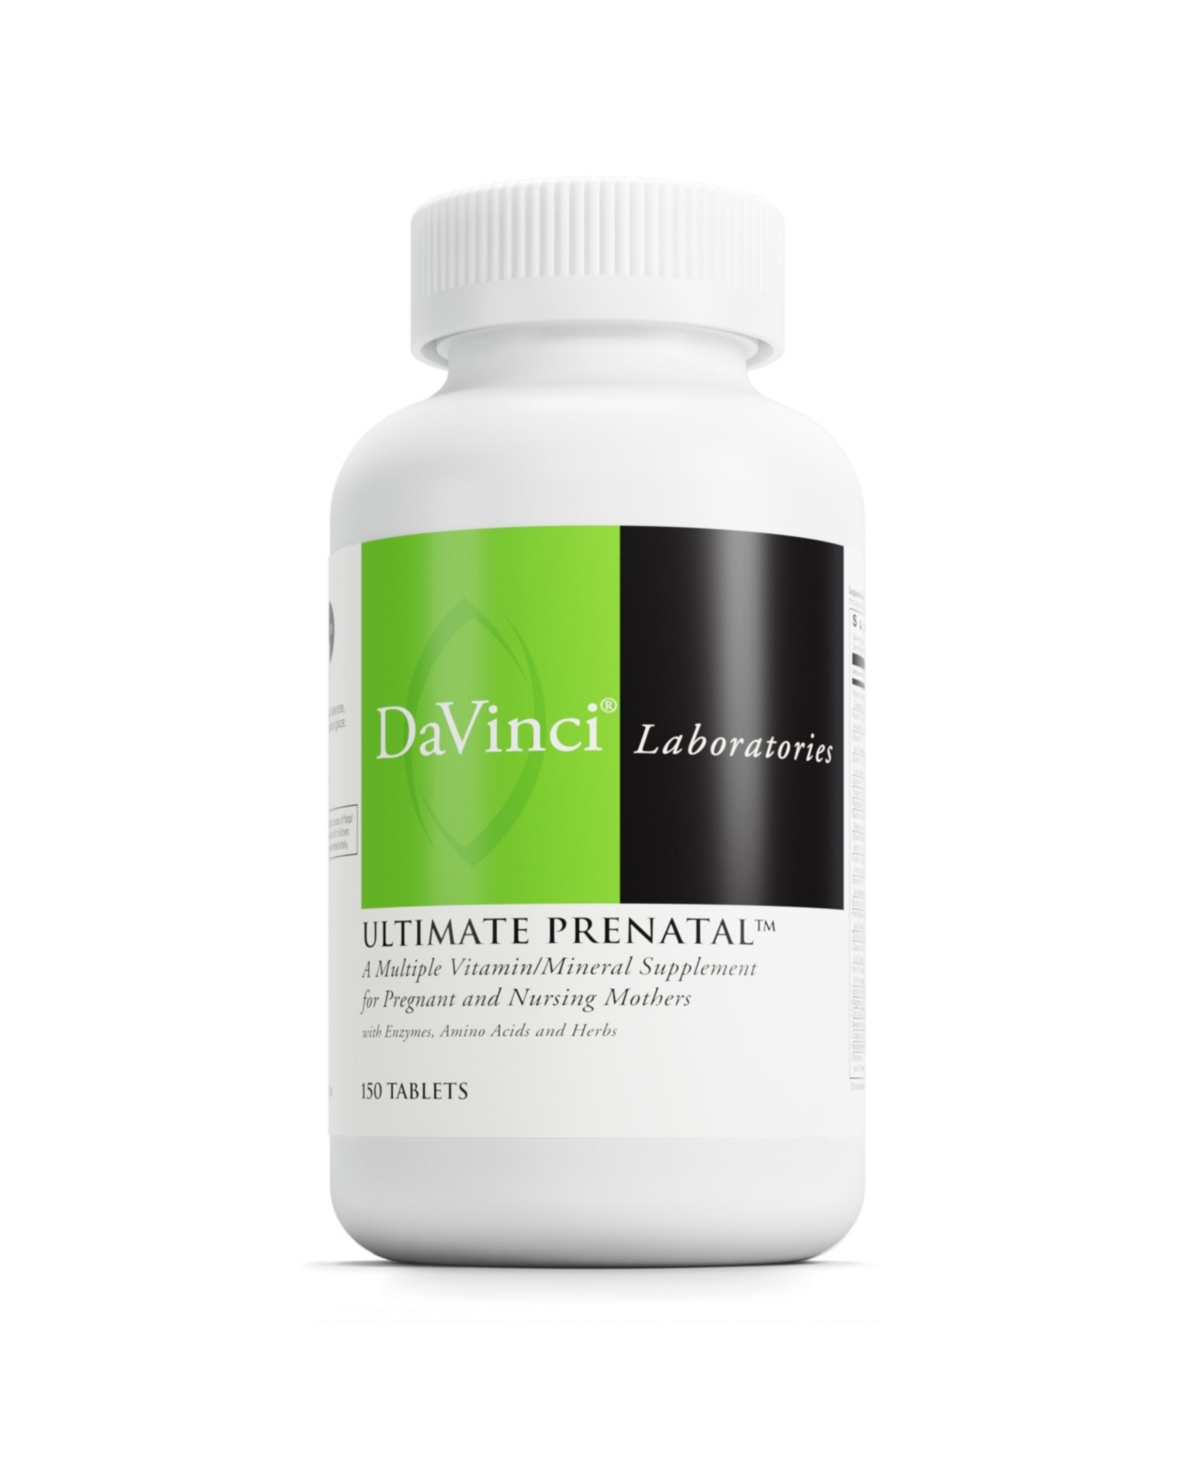 DaVinci Labs Ultimate Prenatal - Nutritional Supplement for Pregnant Women and Nursing Mothers to Support Healthy Pregnancy and L